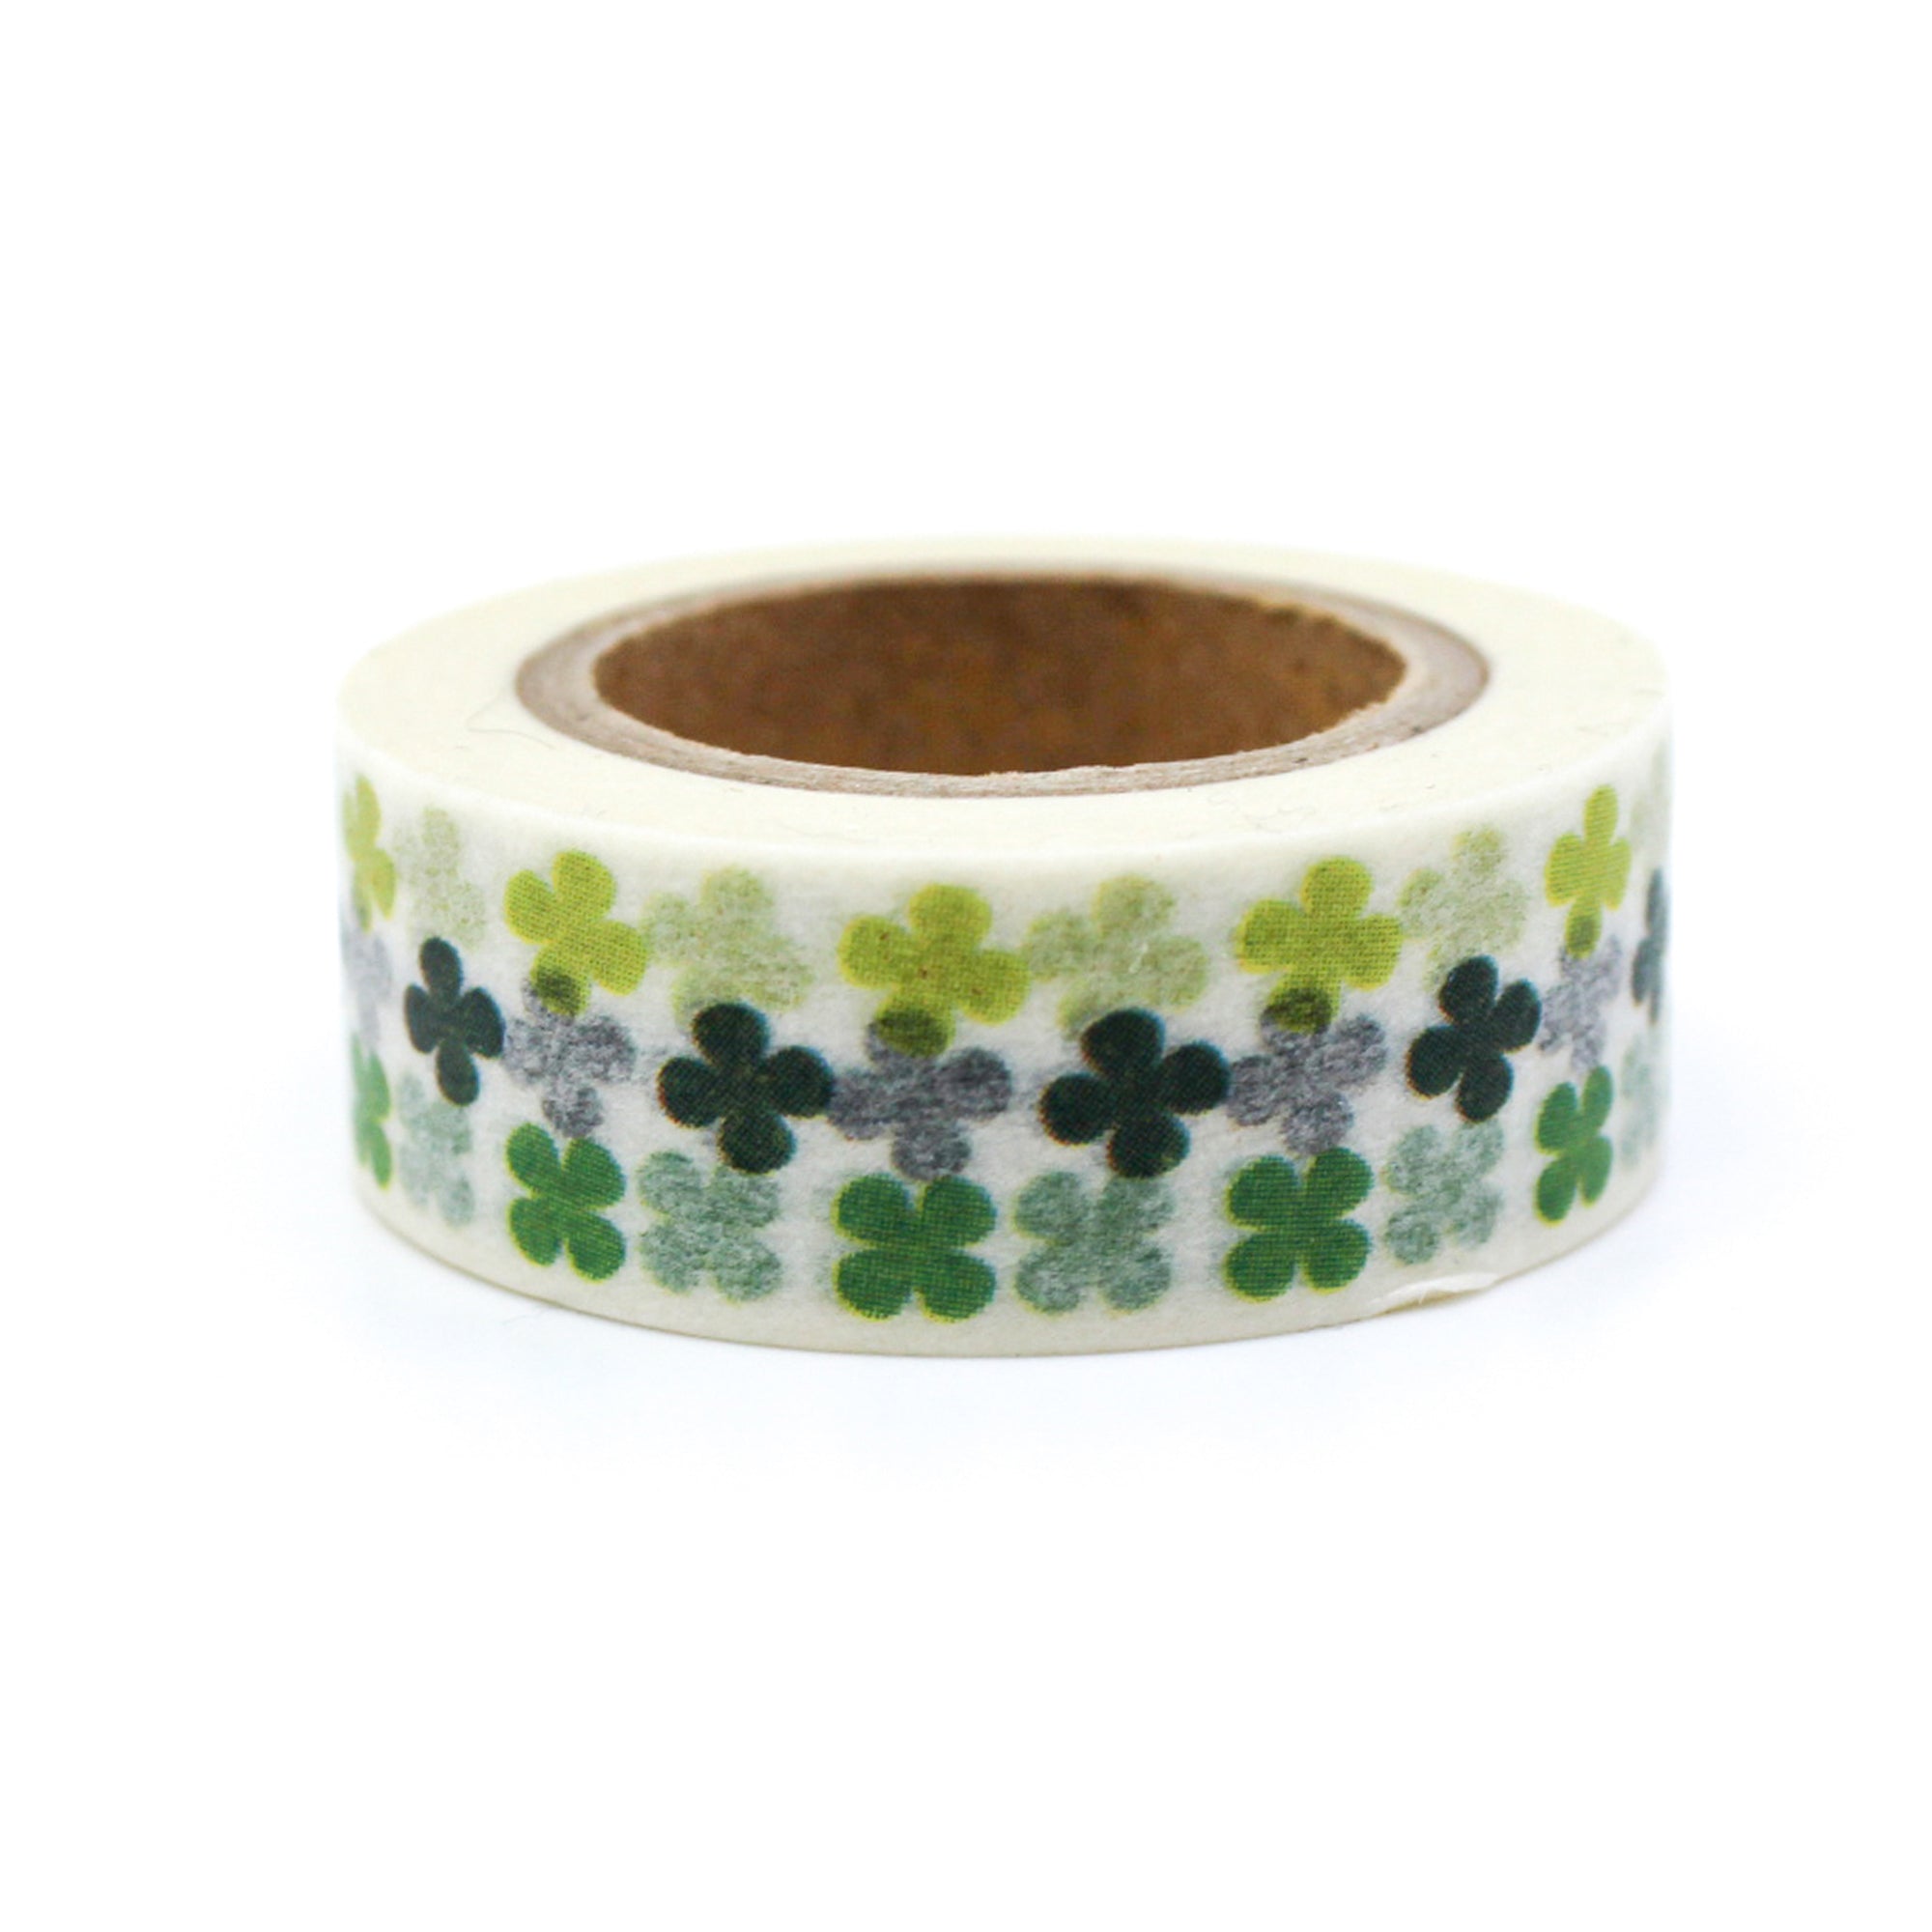 This fun green clover tape is a refreshing, lively pattern that is perfect for your BUJO and craft projects. Spring is in the air with this green clover tape, perfect for your St. Patrick's Day projects and spreads. This tape is sold at BBB Supplies Craft Shop.